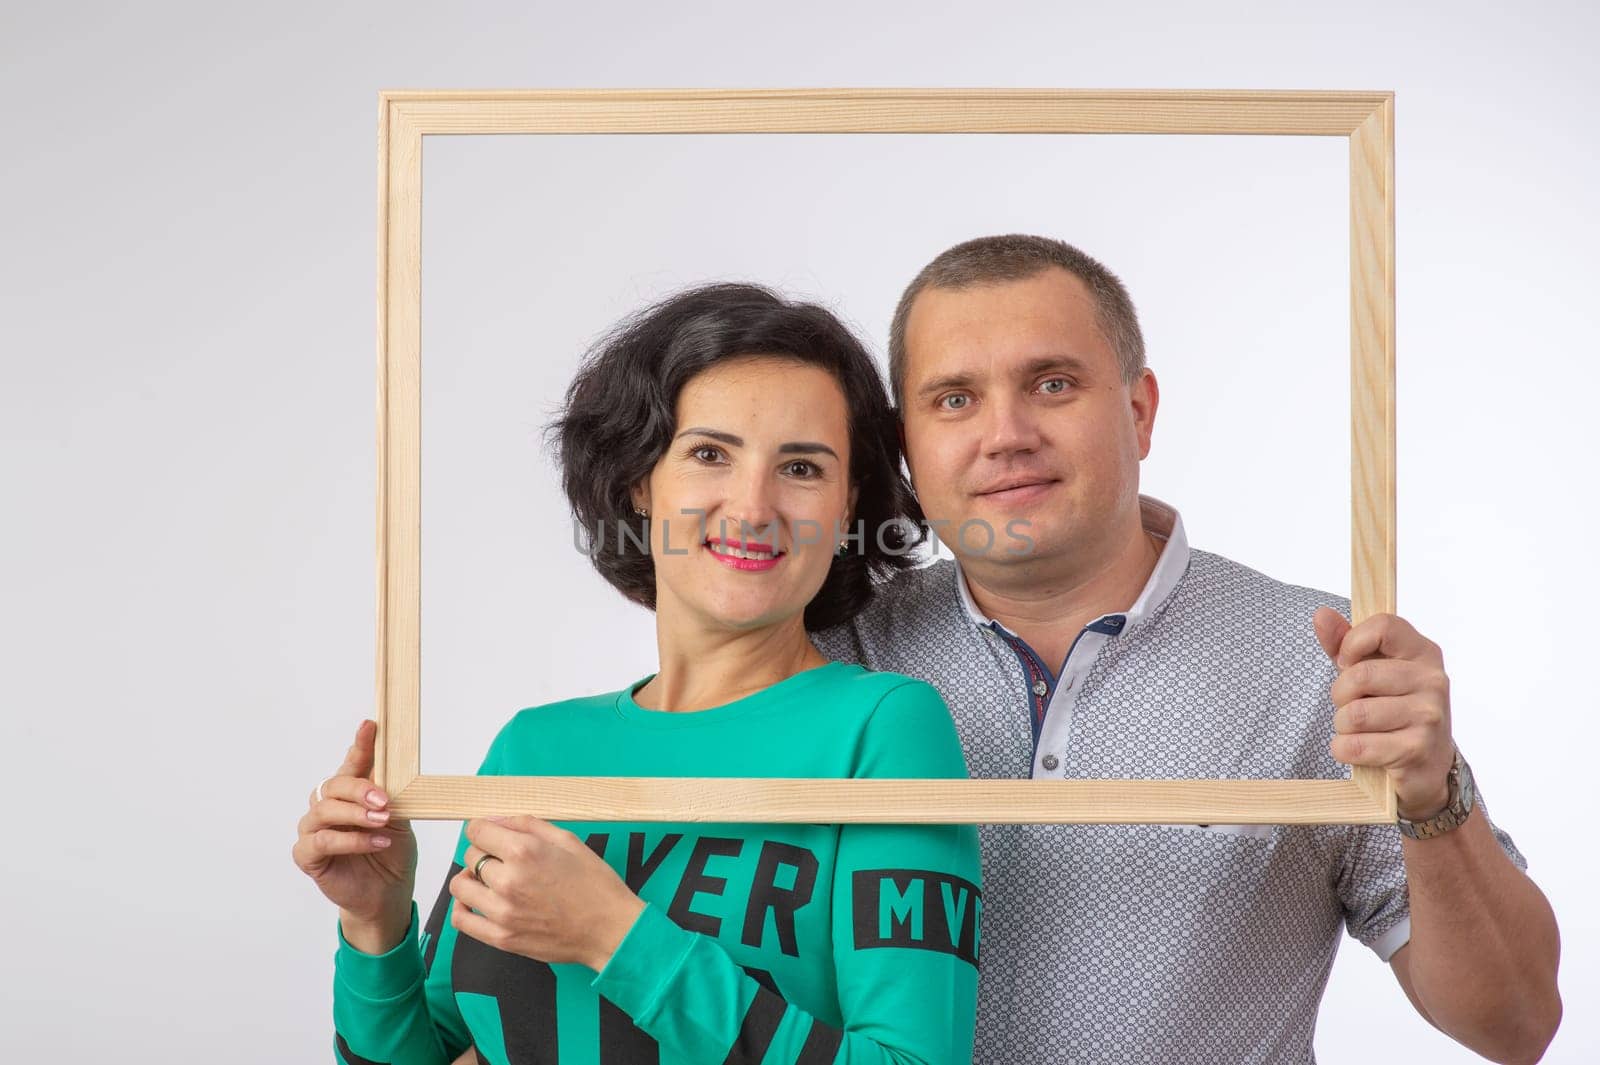 studio portrait of husband and wife in photo frame happy family 2 by Mixa74